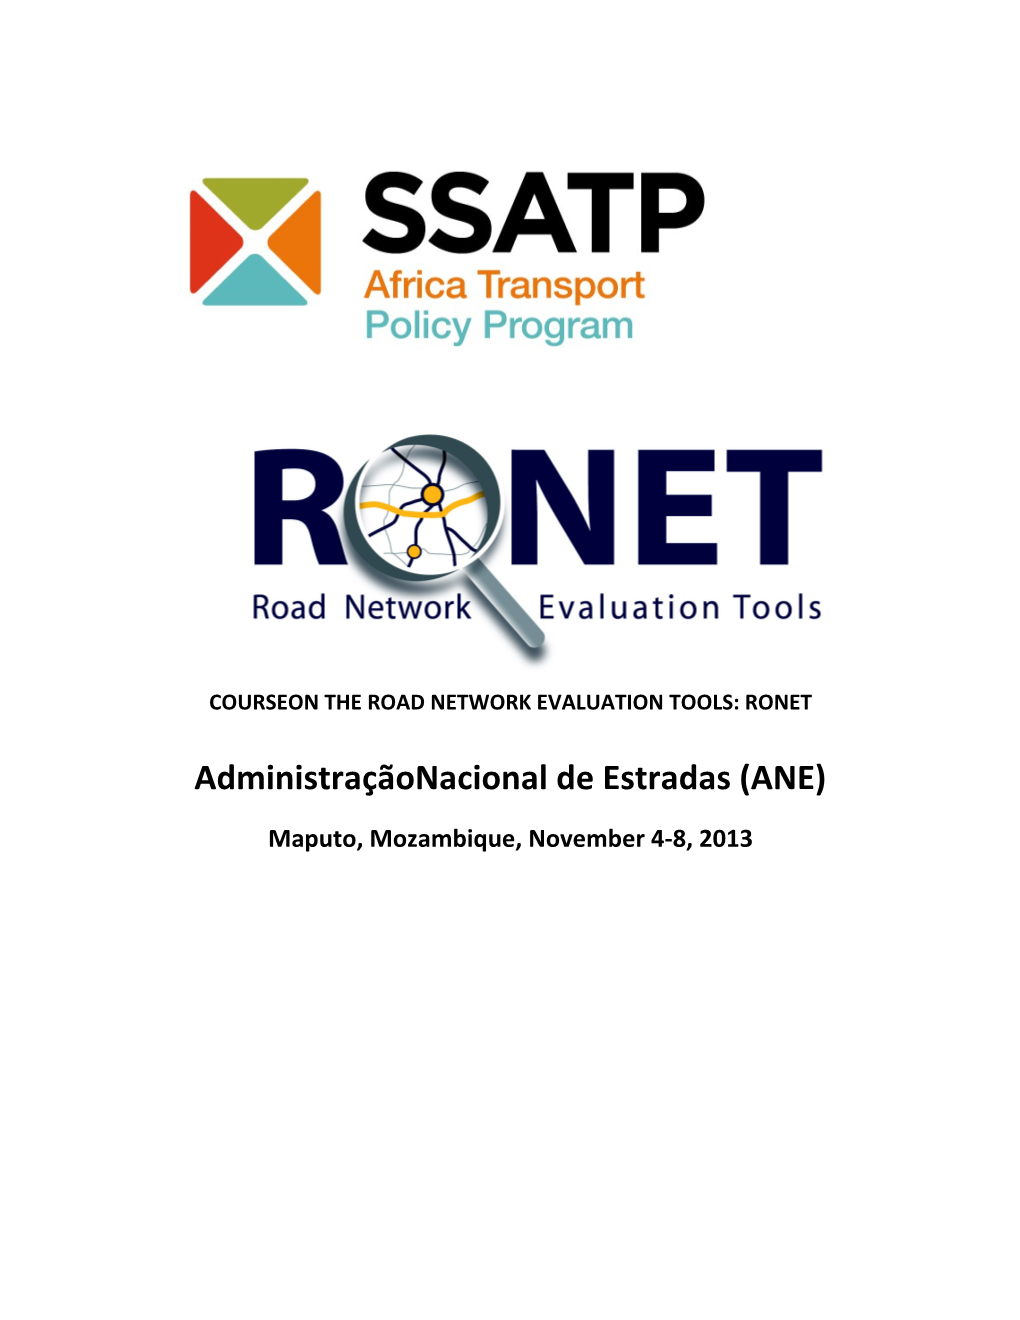 Courseon the Road Network Evaluation Tools: Ronet